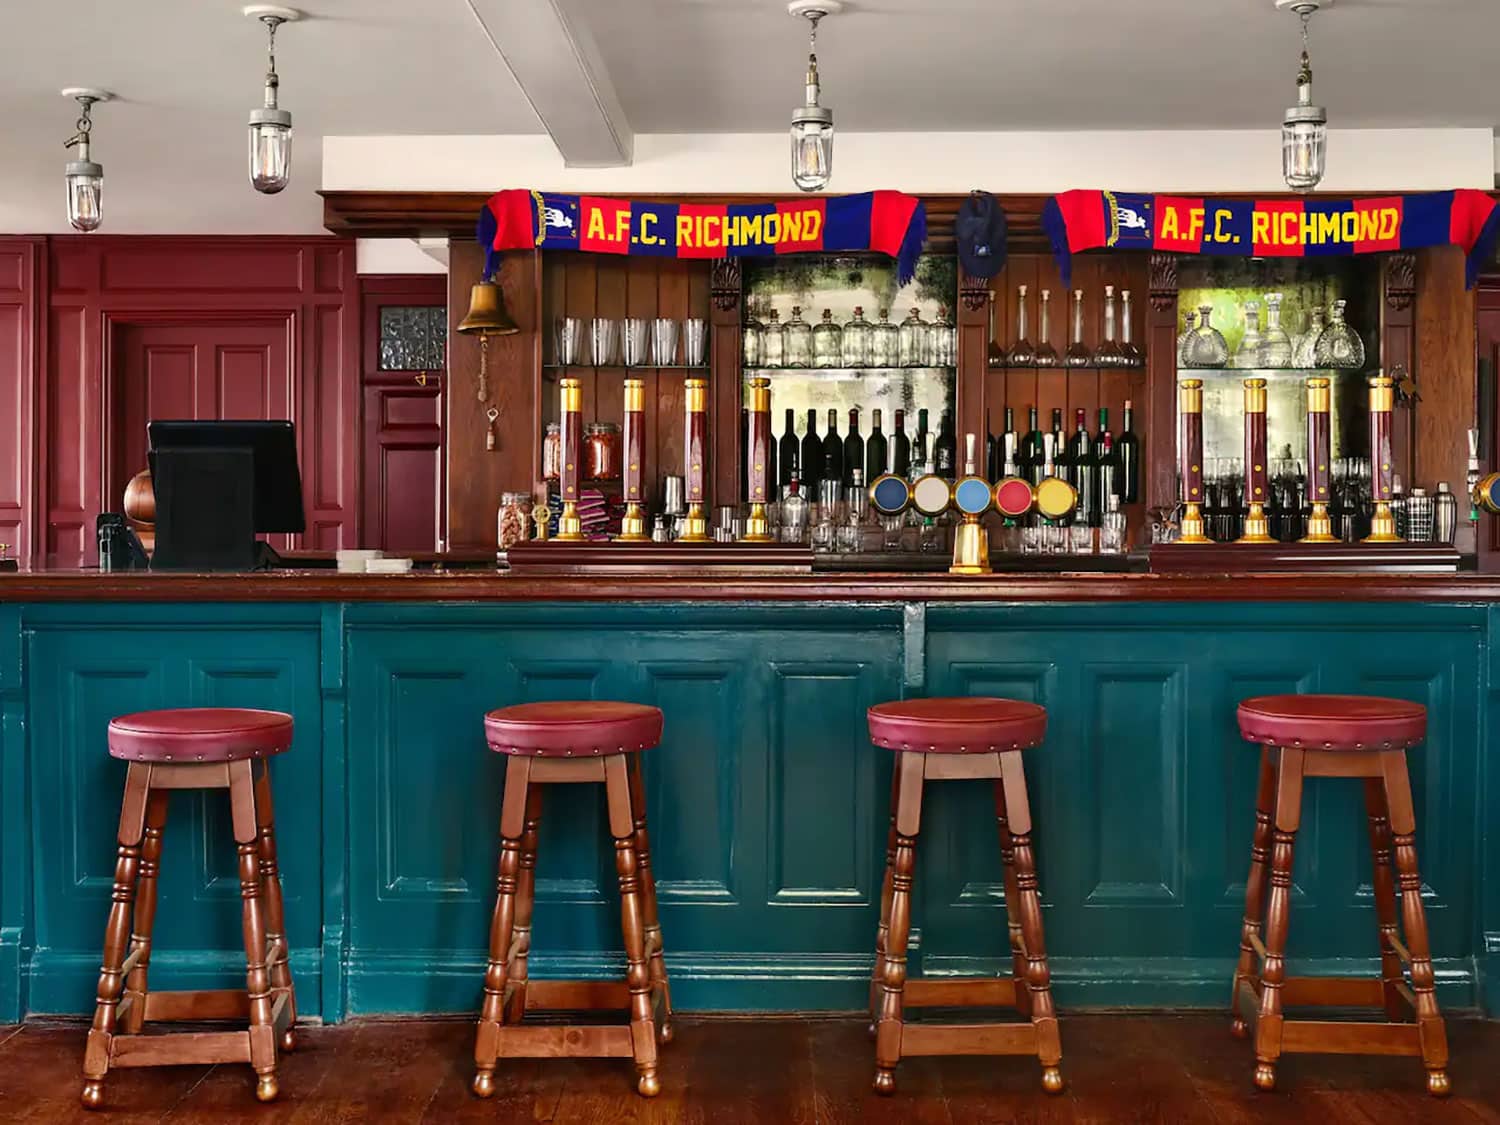 The interior bar shot of The Prince's Head pub in Richmond, England, where the Crown and Anchor scenes are filmed for Ted Lasso.